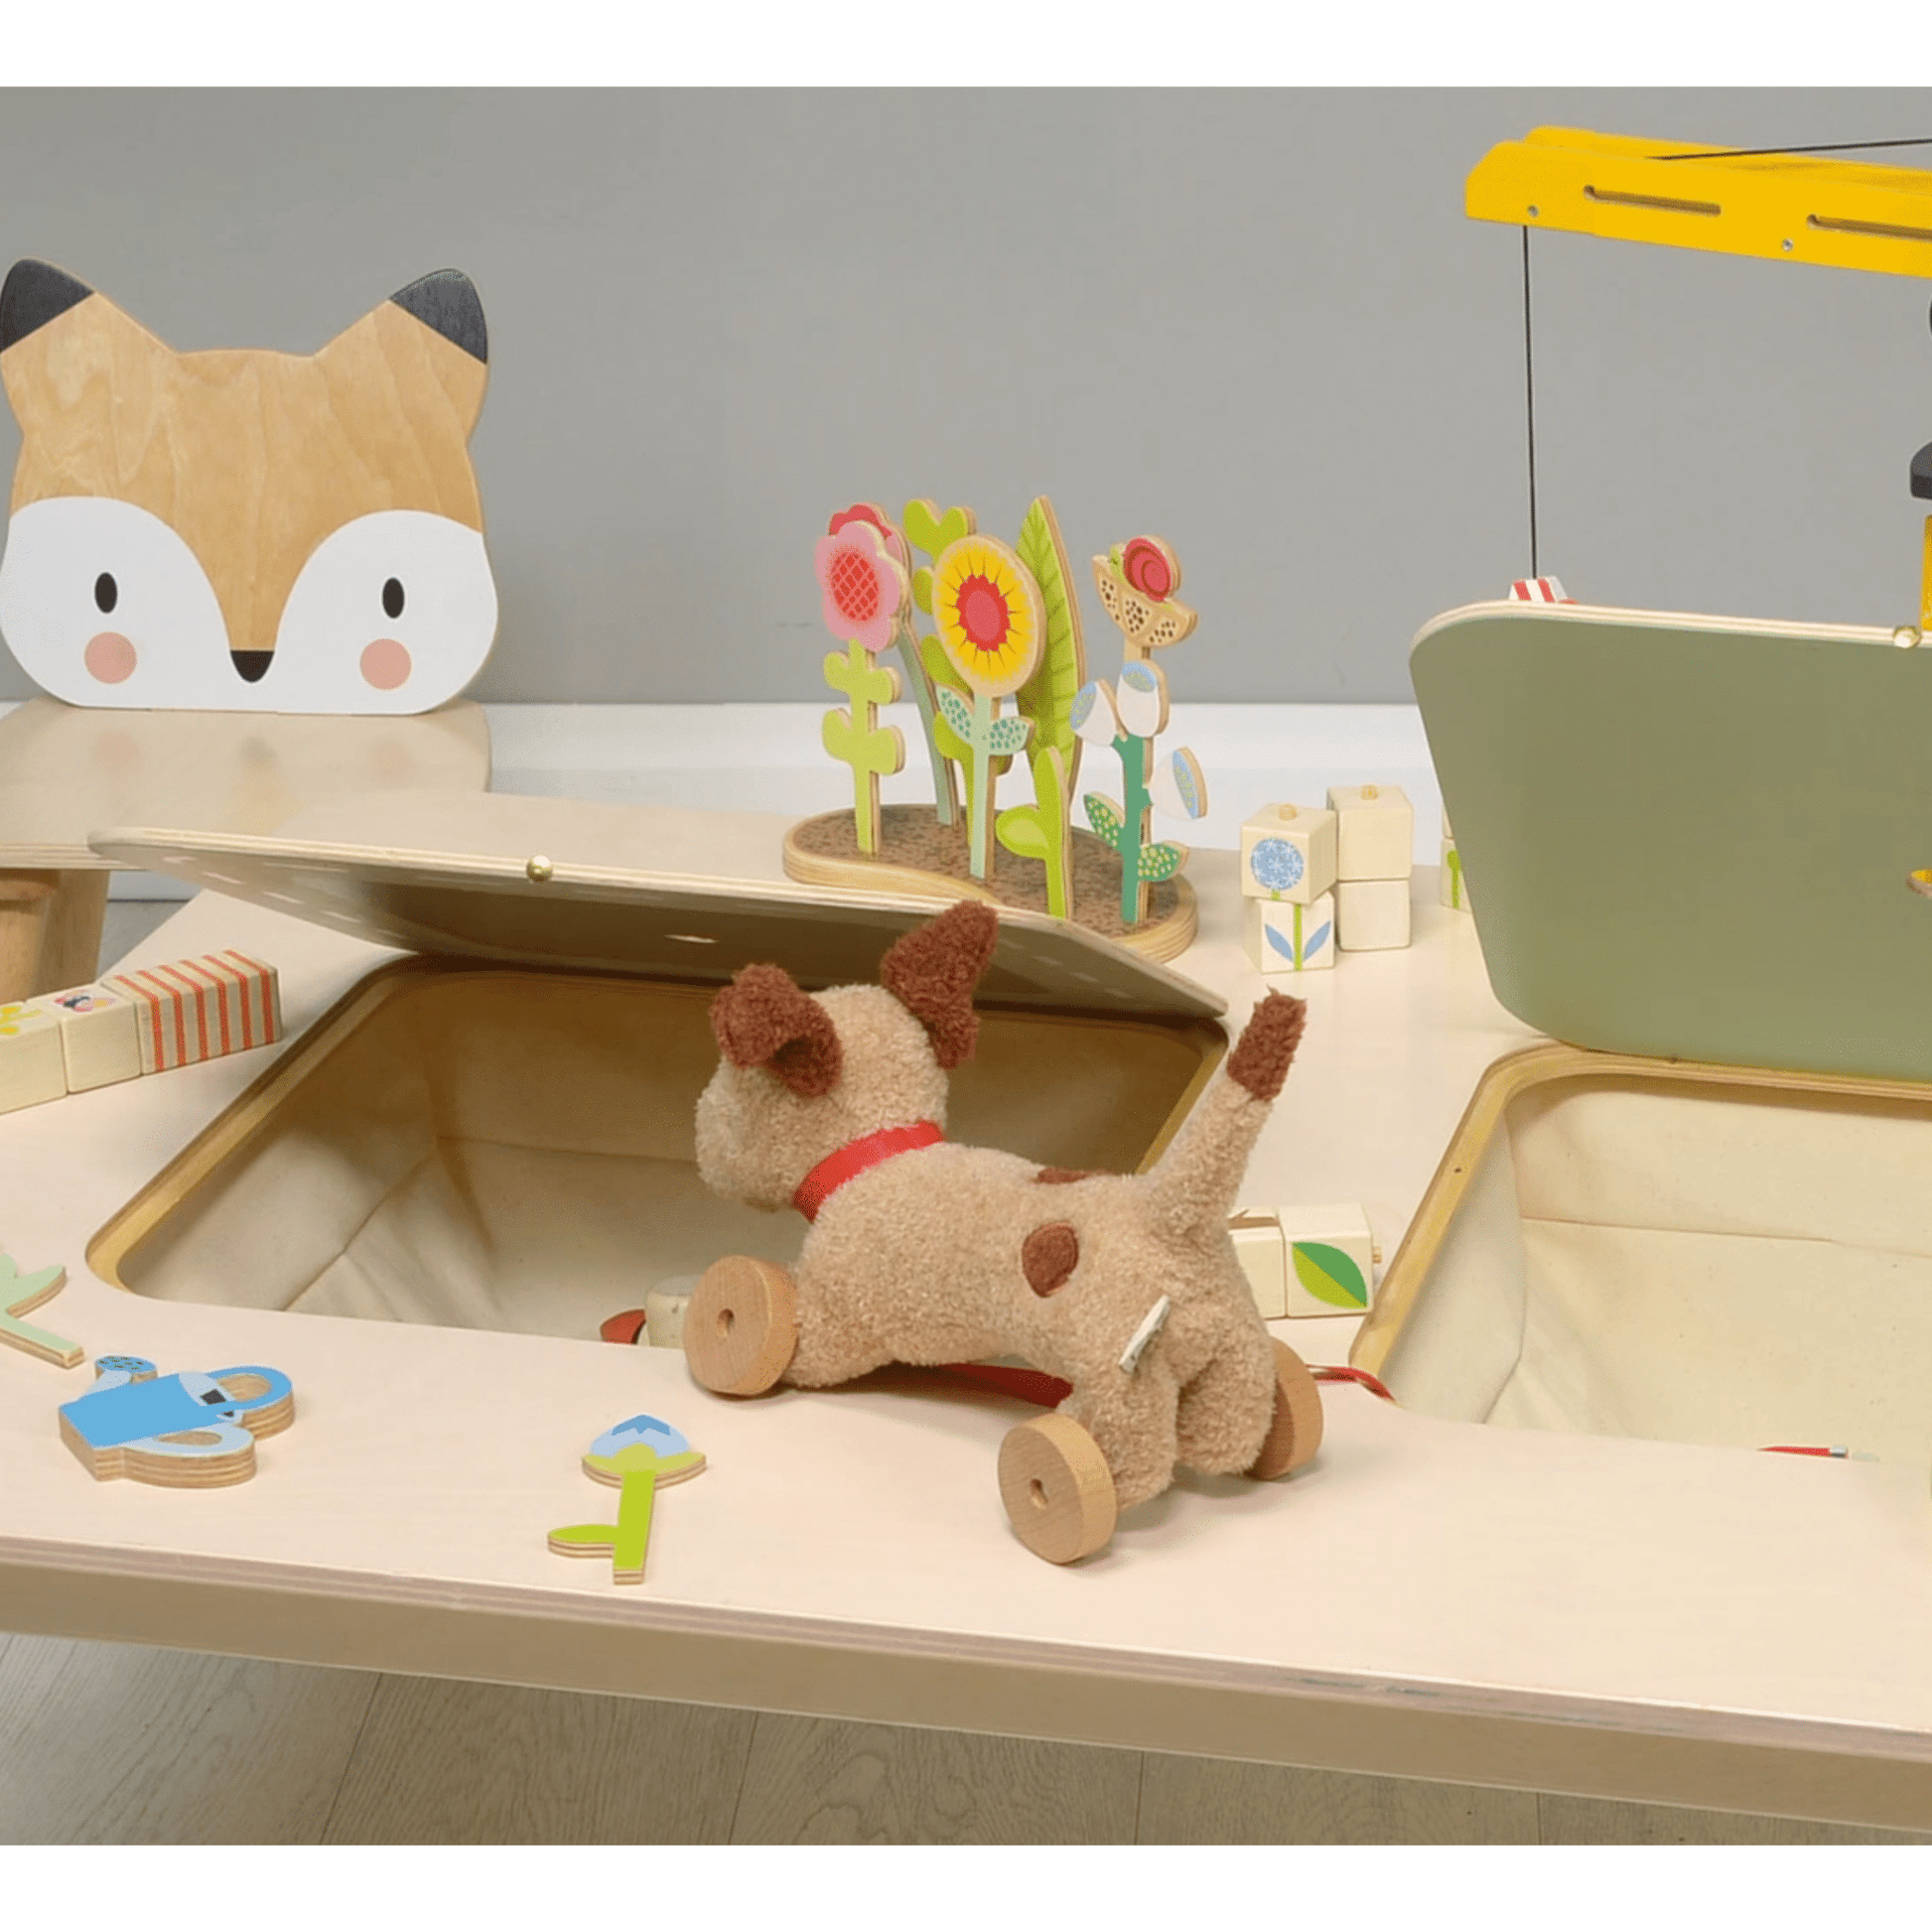 Play Table - The Online Toy Shop - Table - 4